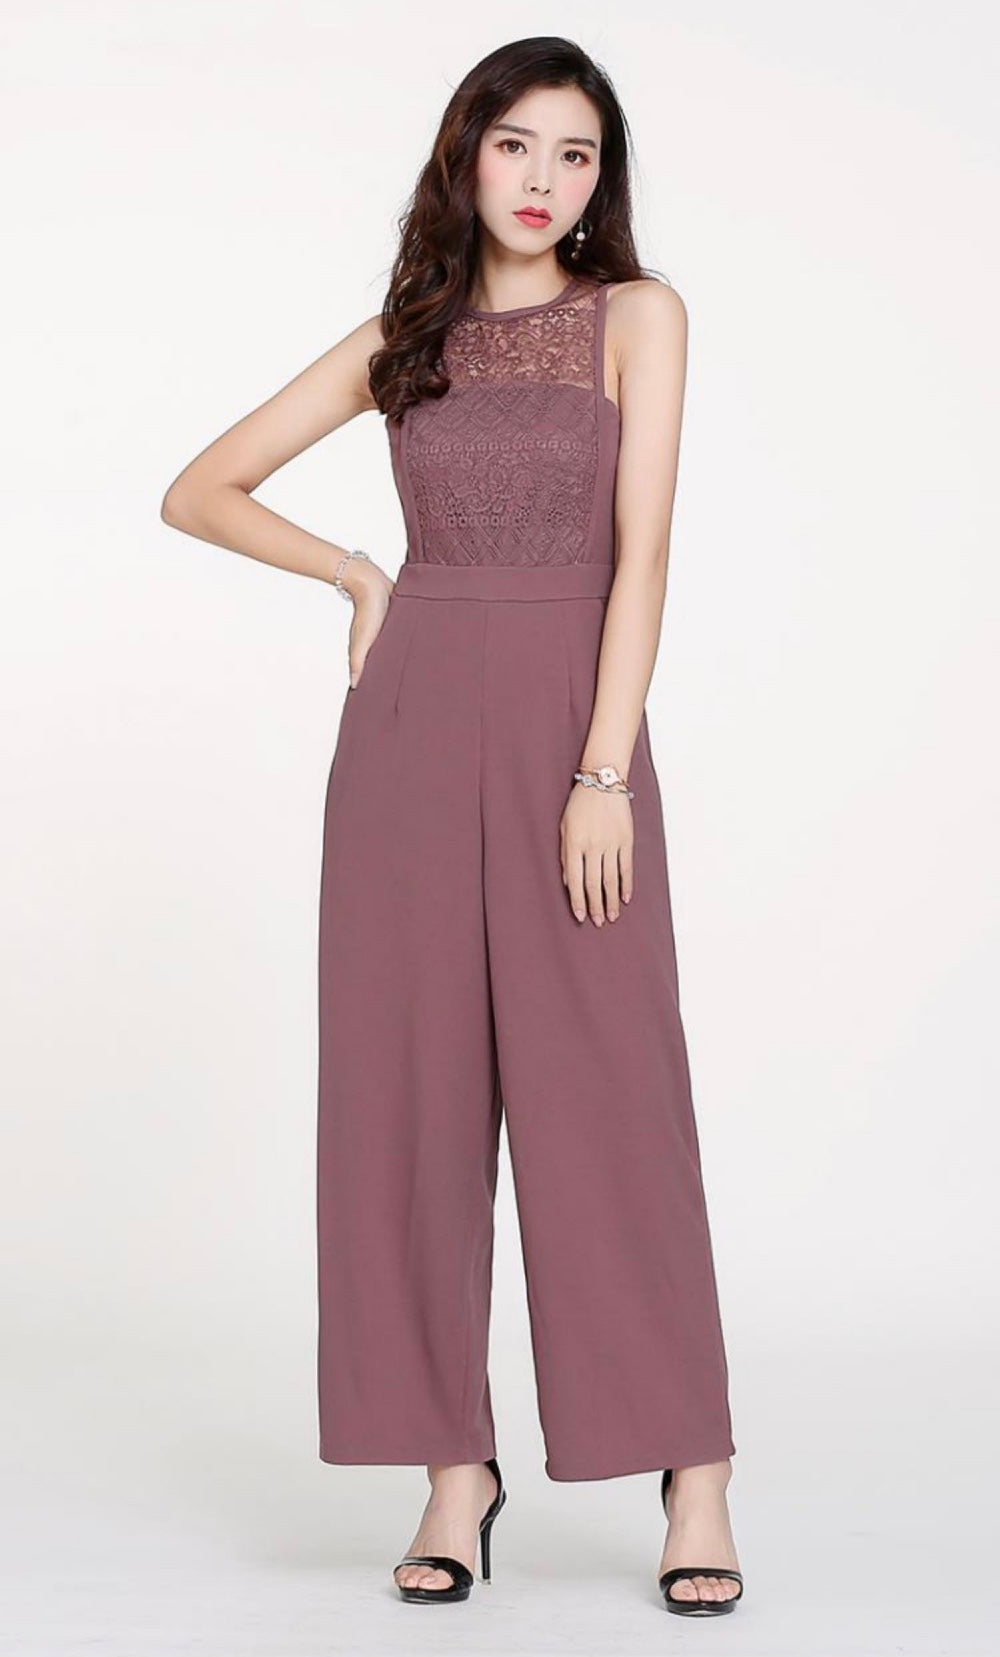 Embroidered Lace Combo Jumpsuit